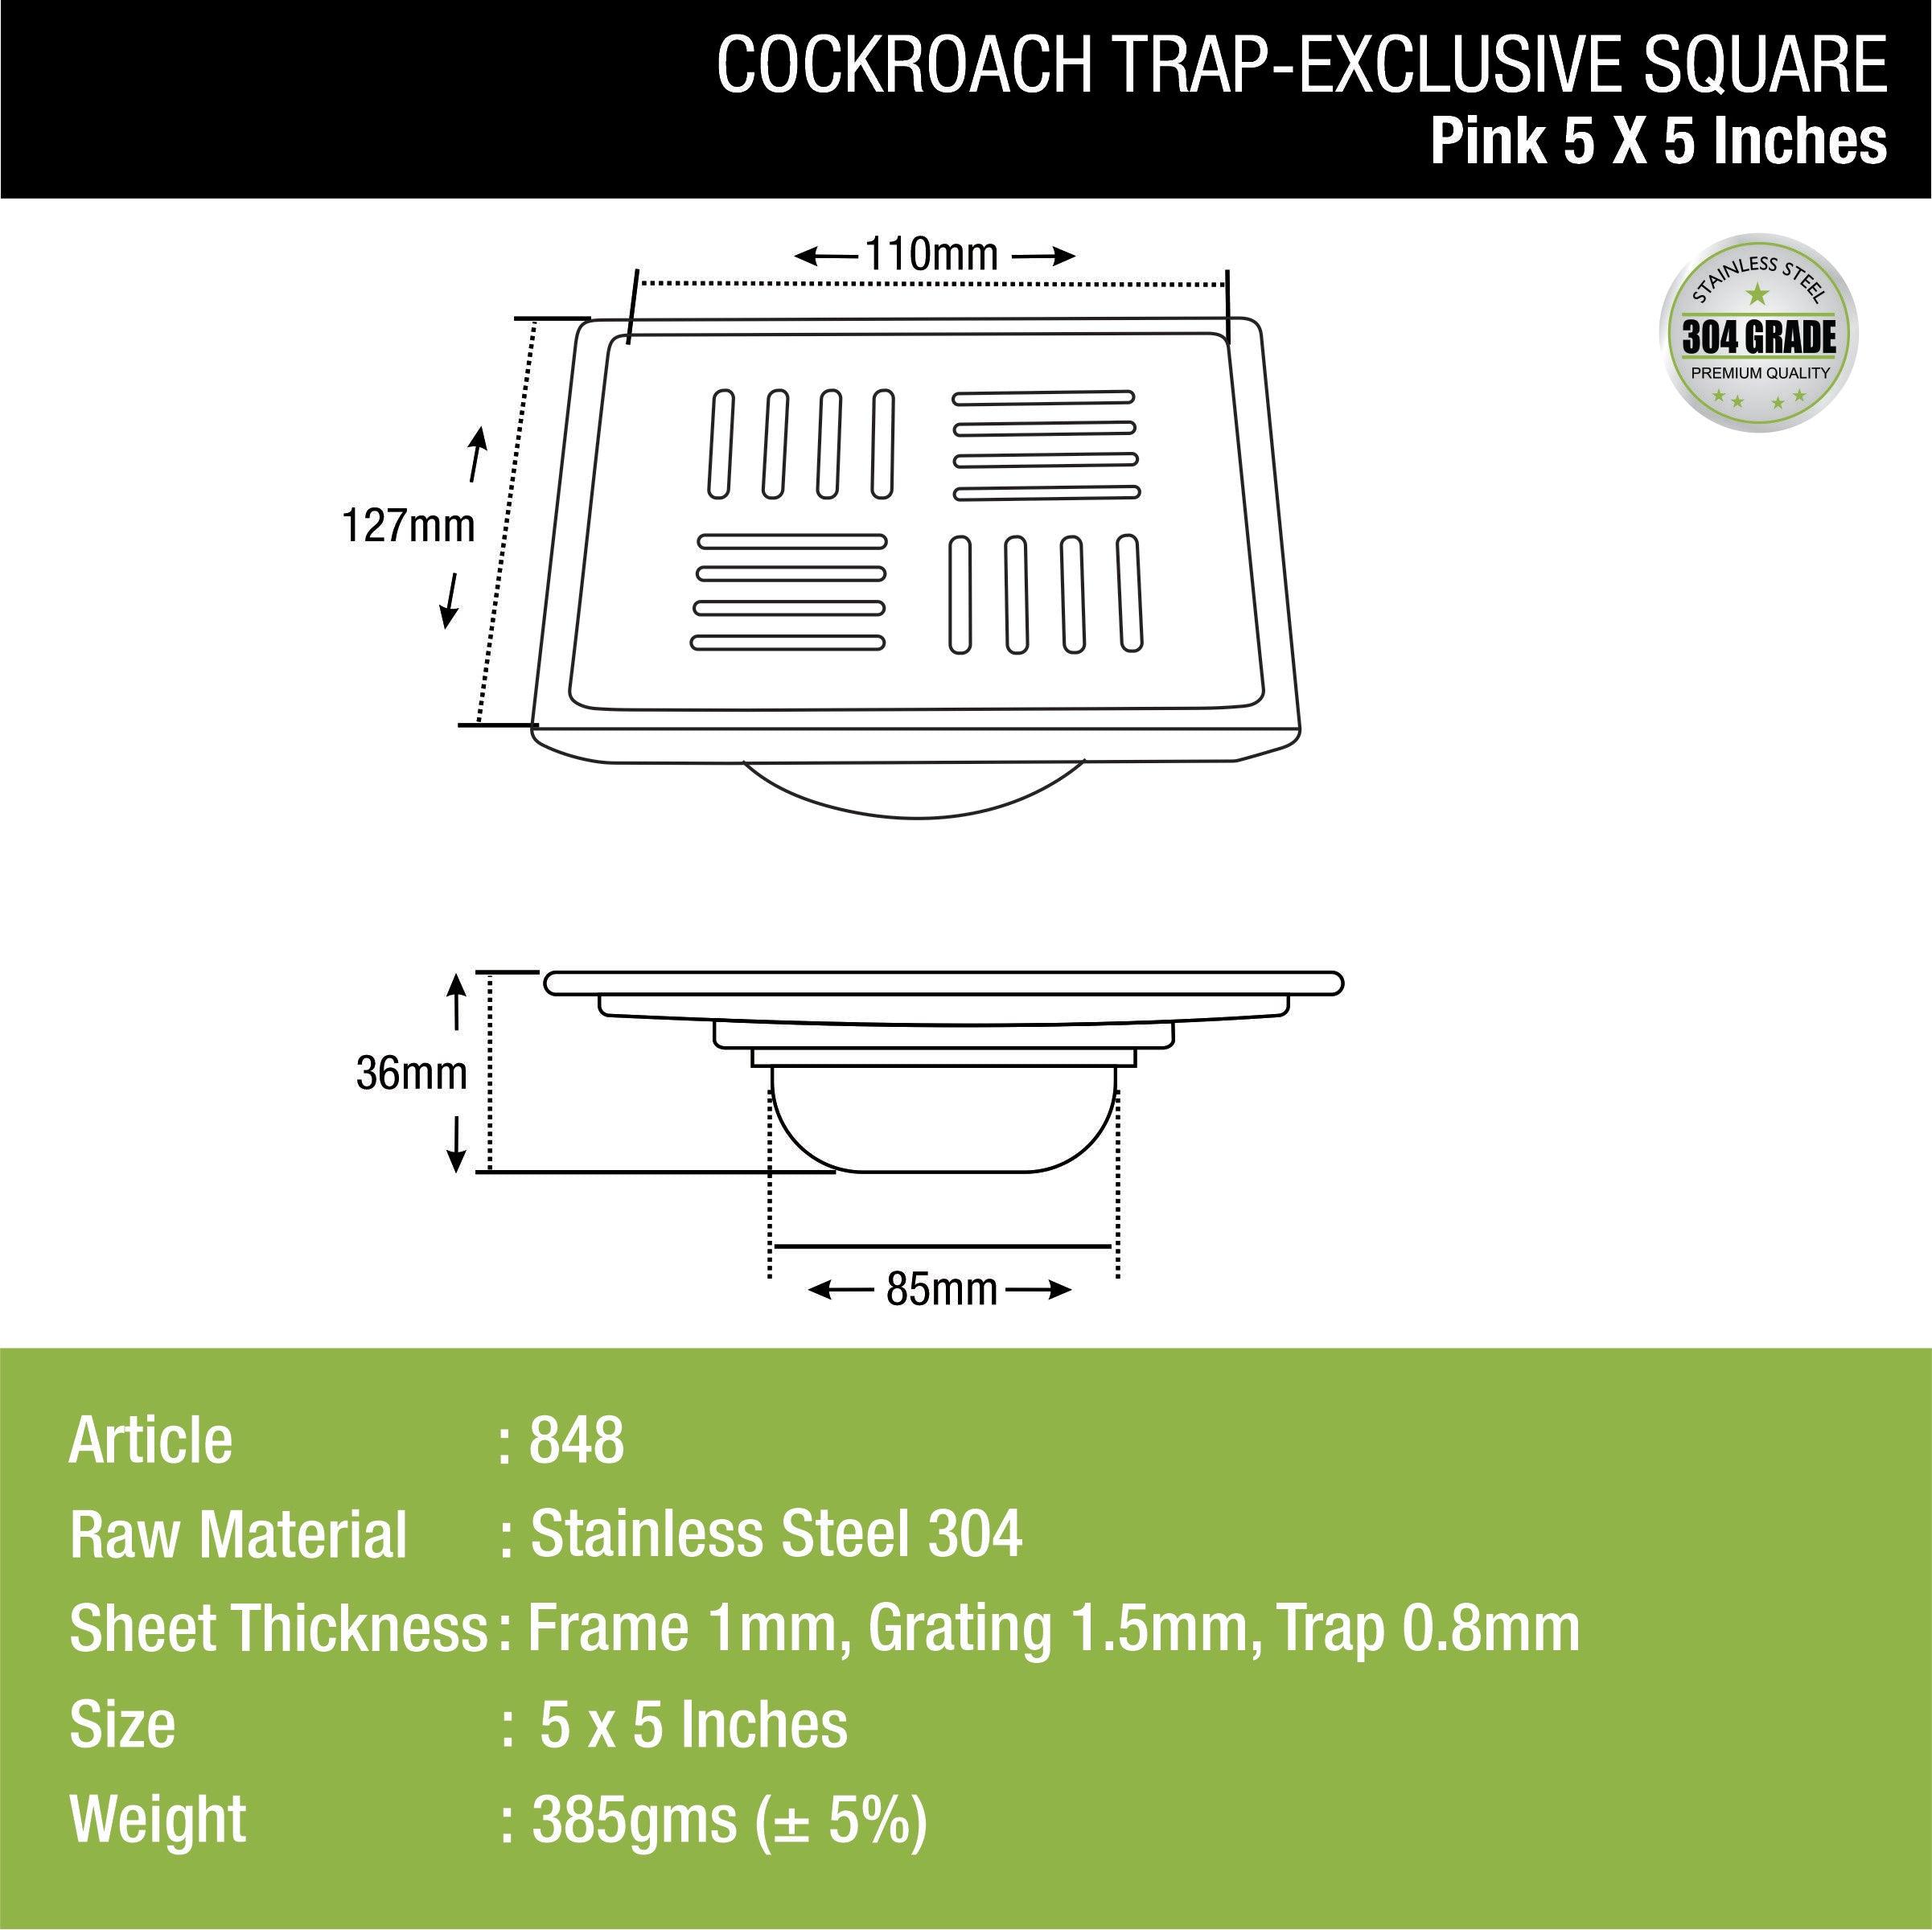 Pink Exclusive Square Floor Drain (5 x 5 Inches) with Cockroach Trap dimensions and sizes